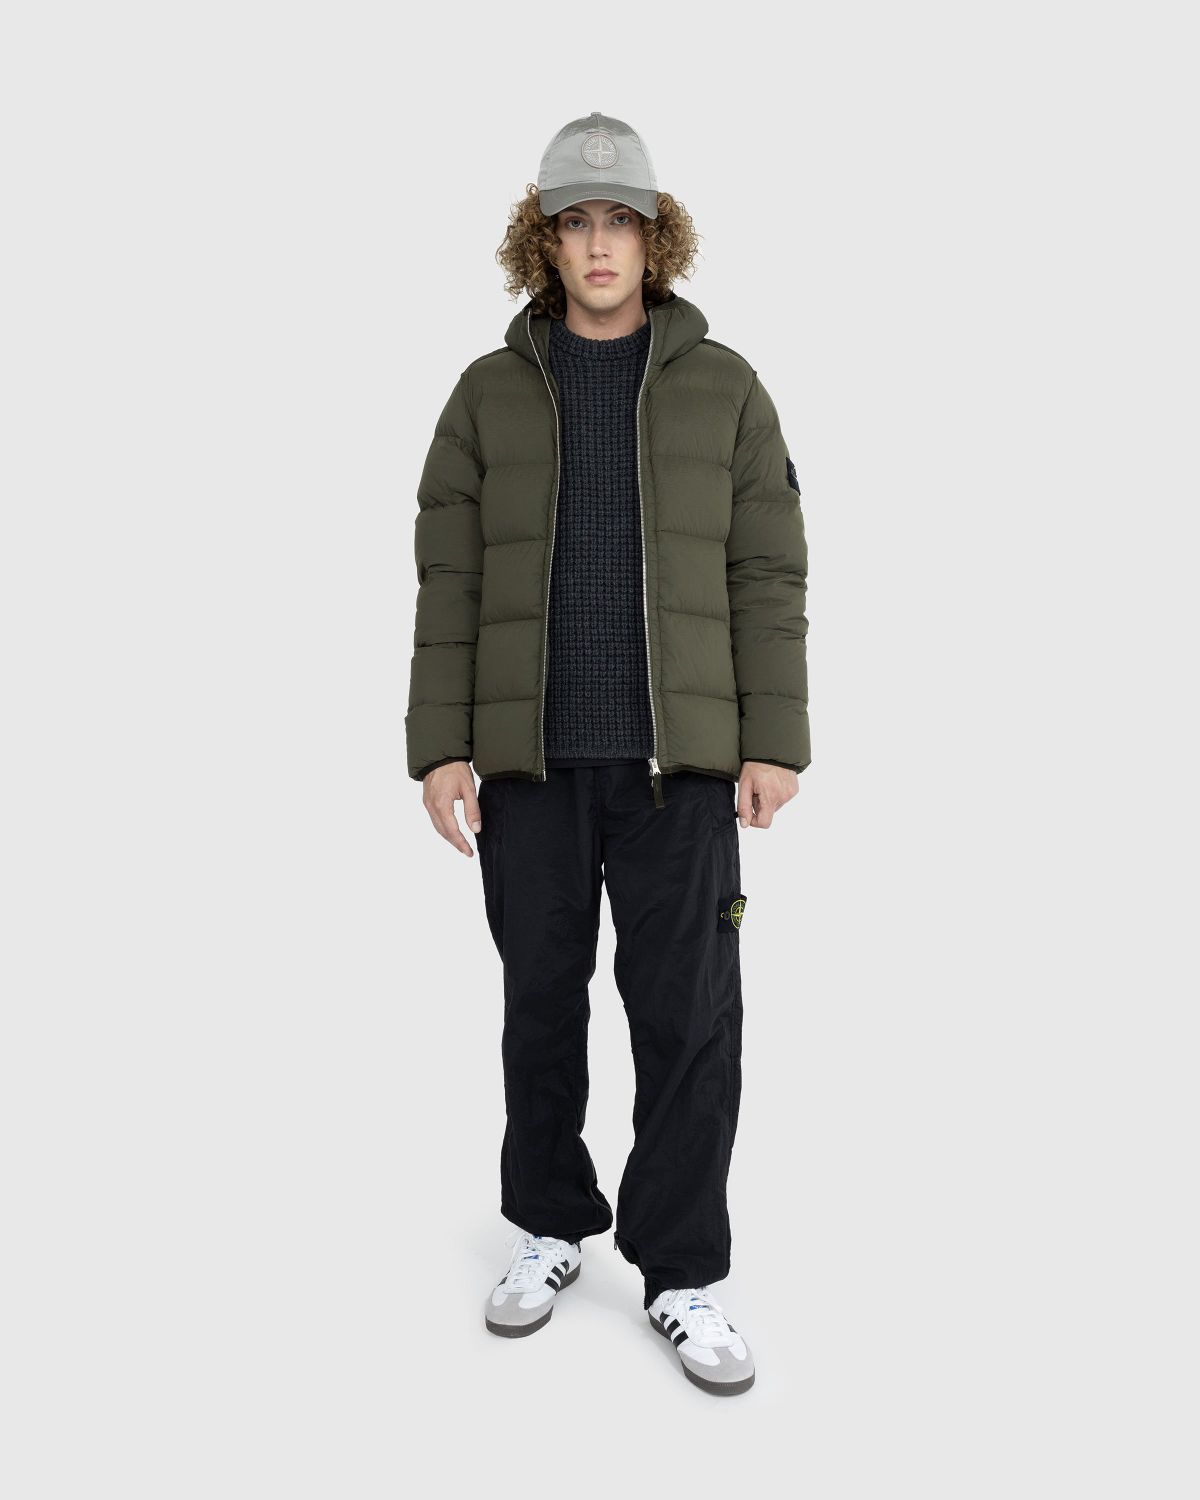 Stone Island – Real Down Jacket Olive - Outerwear - Green - Image 3